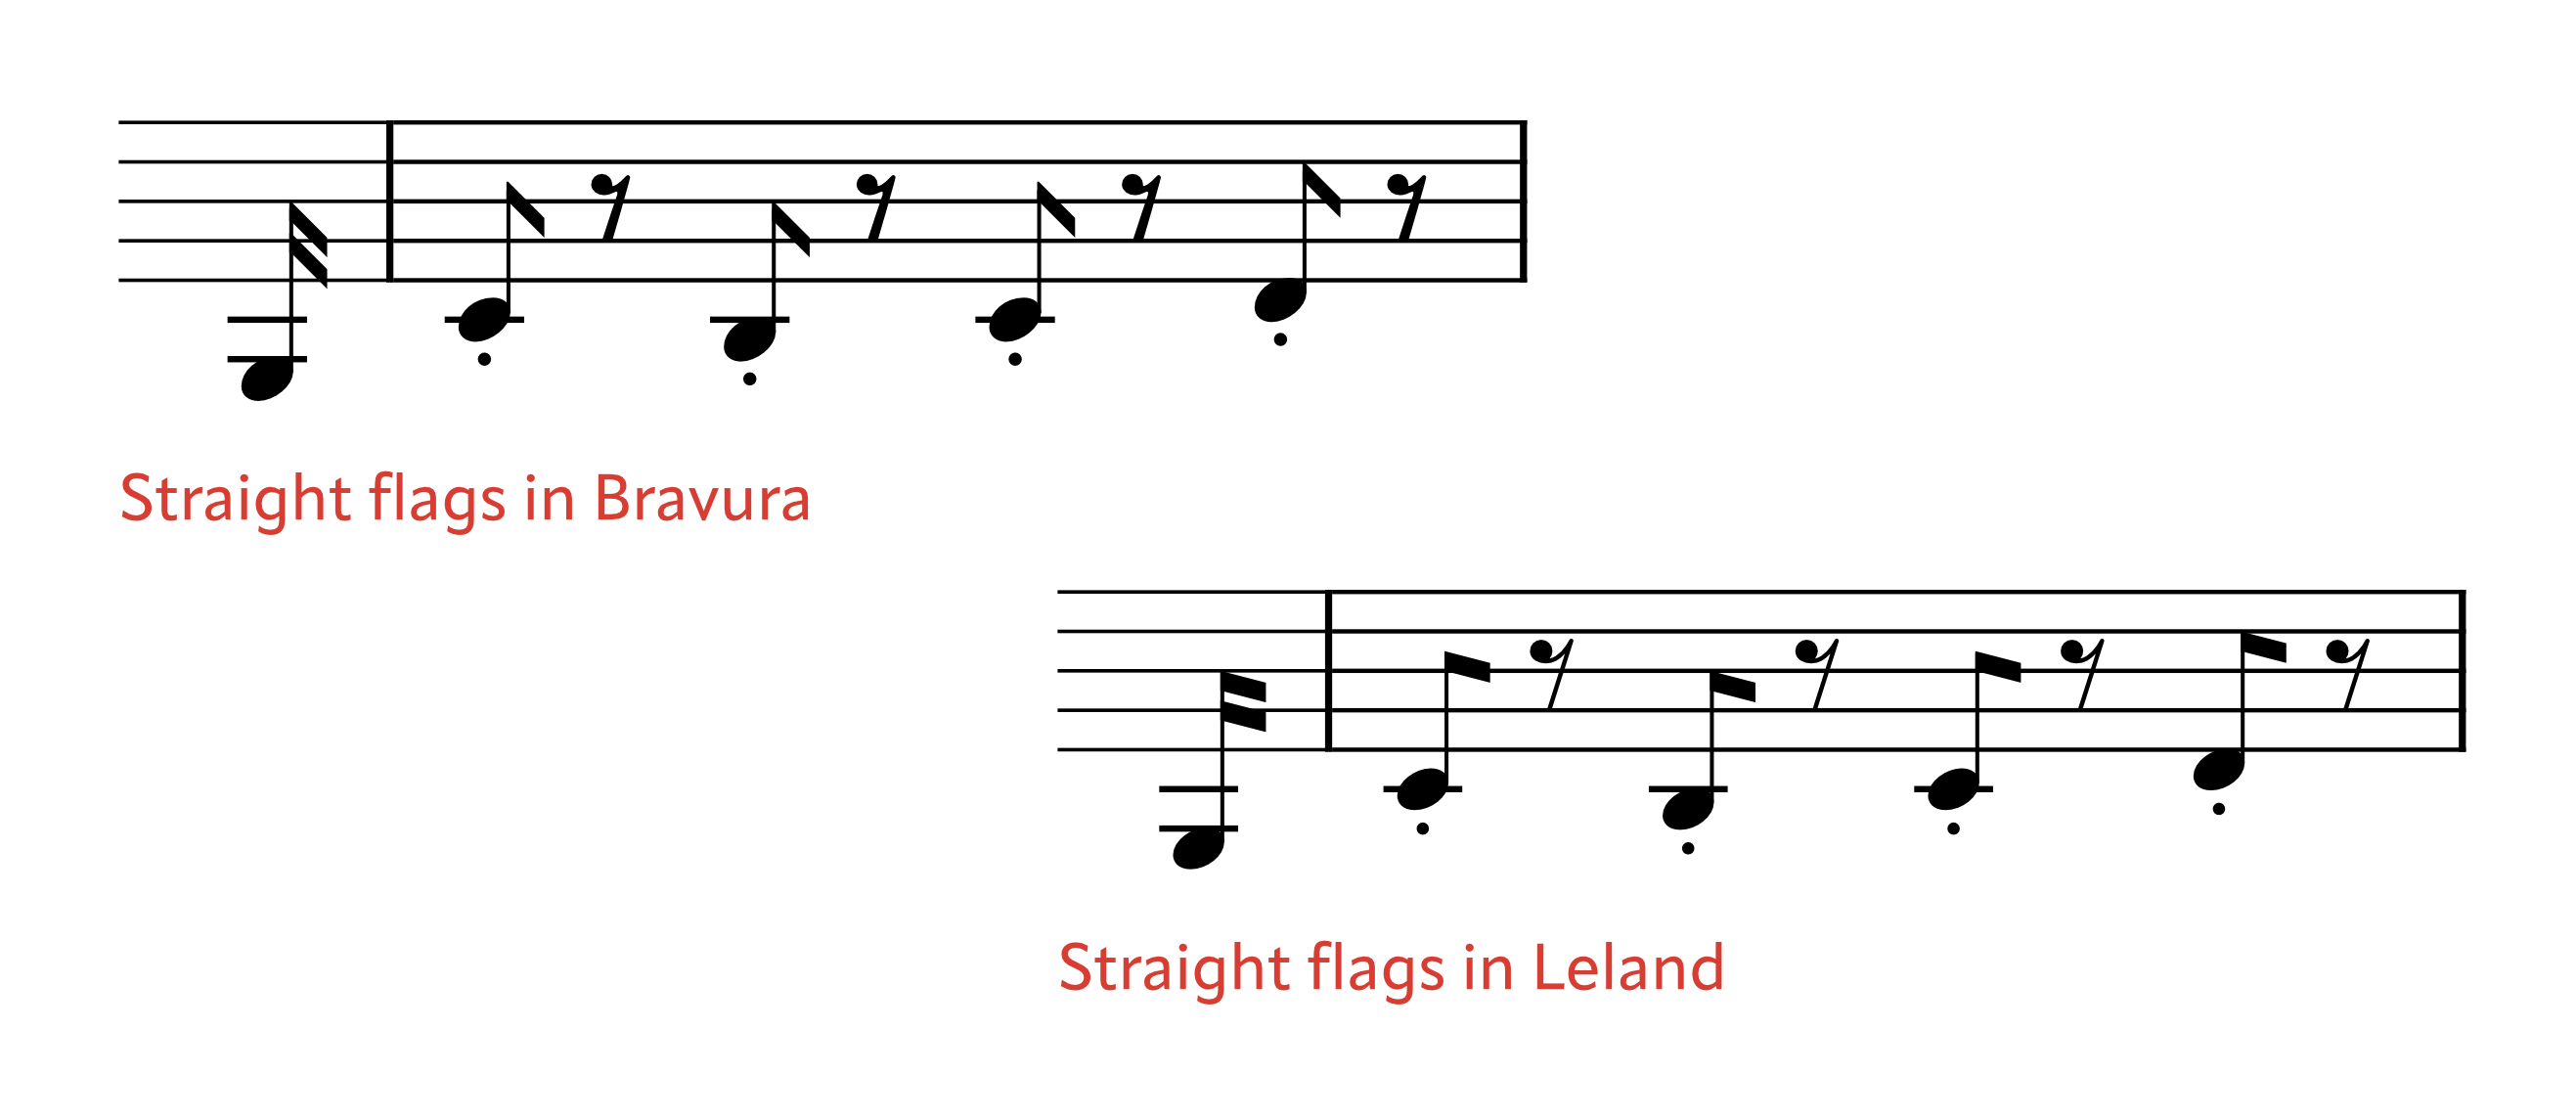 Straight flags in Leland and Bravura